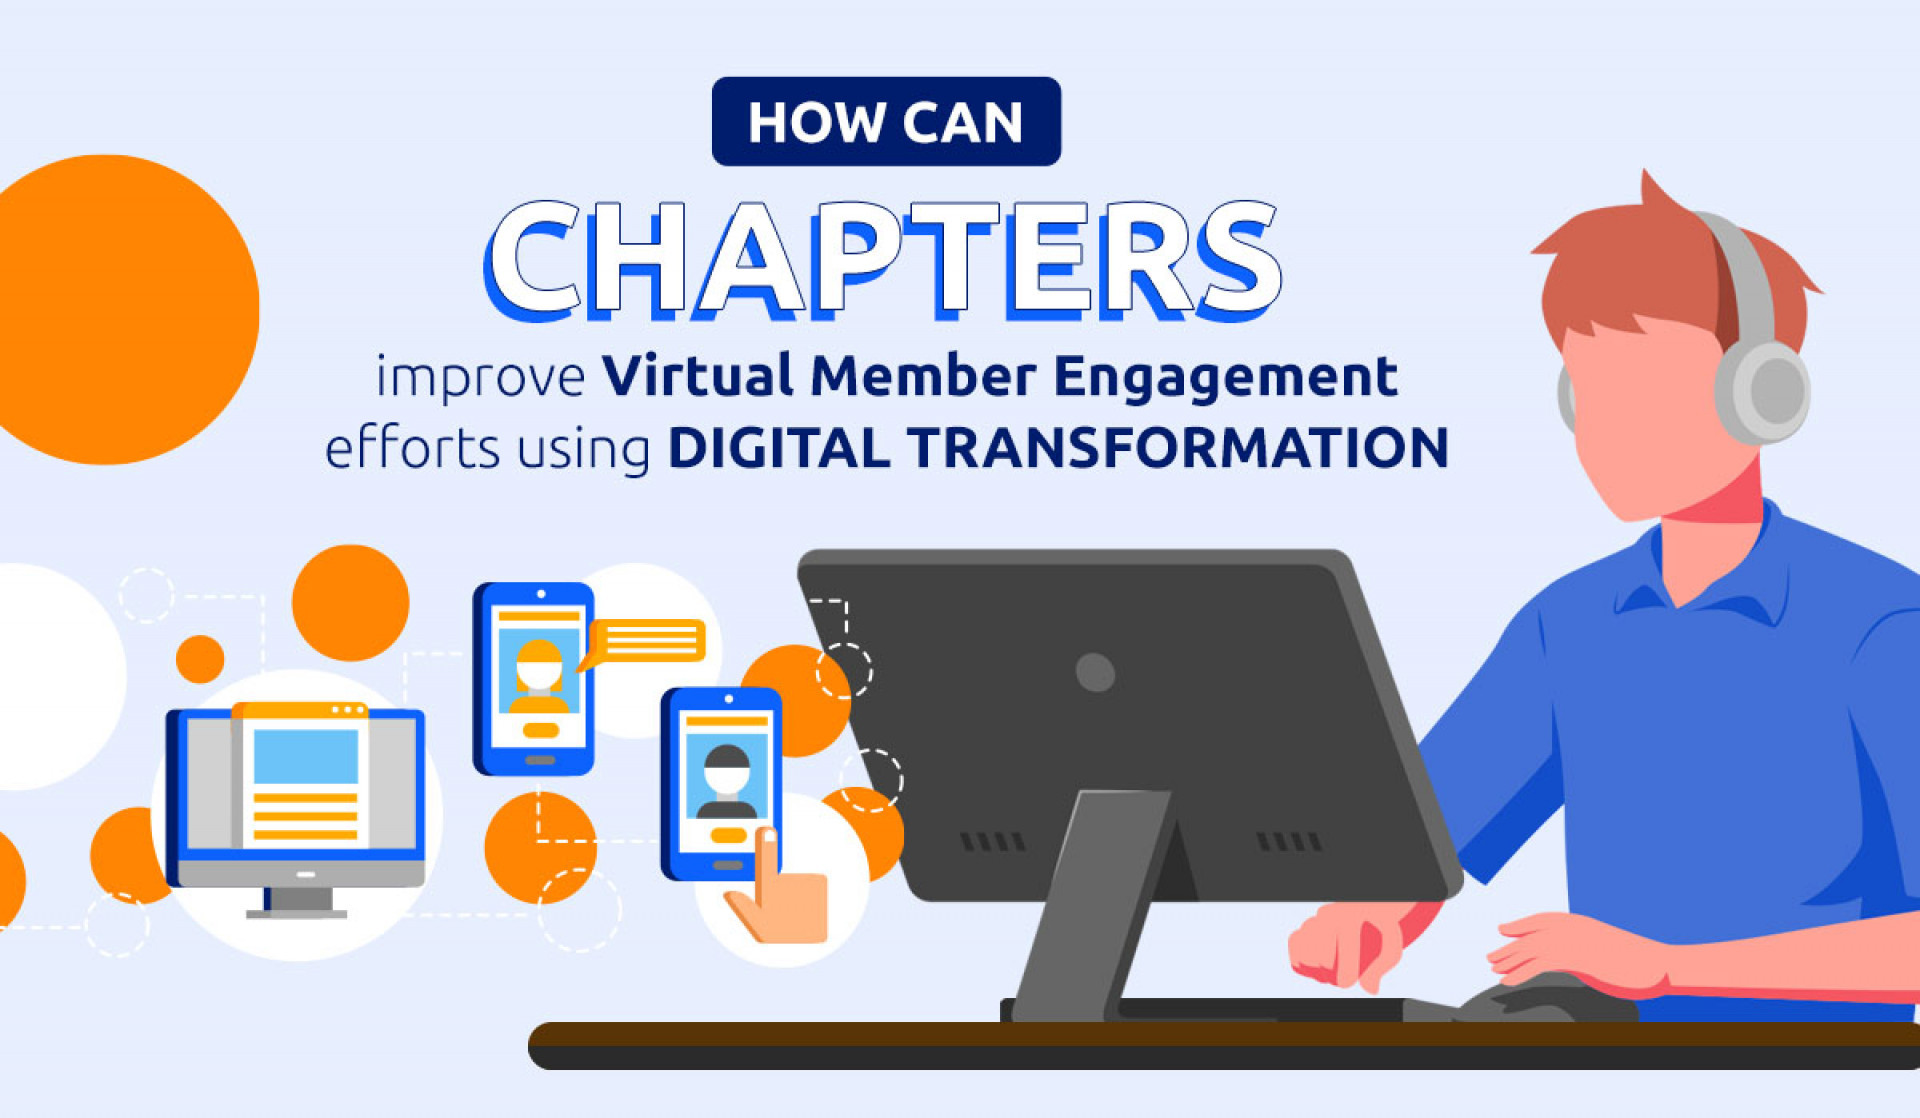 How Can Chapters Improve Virtual Member Engagement Efforts Using Digital Transformation?